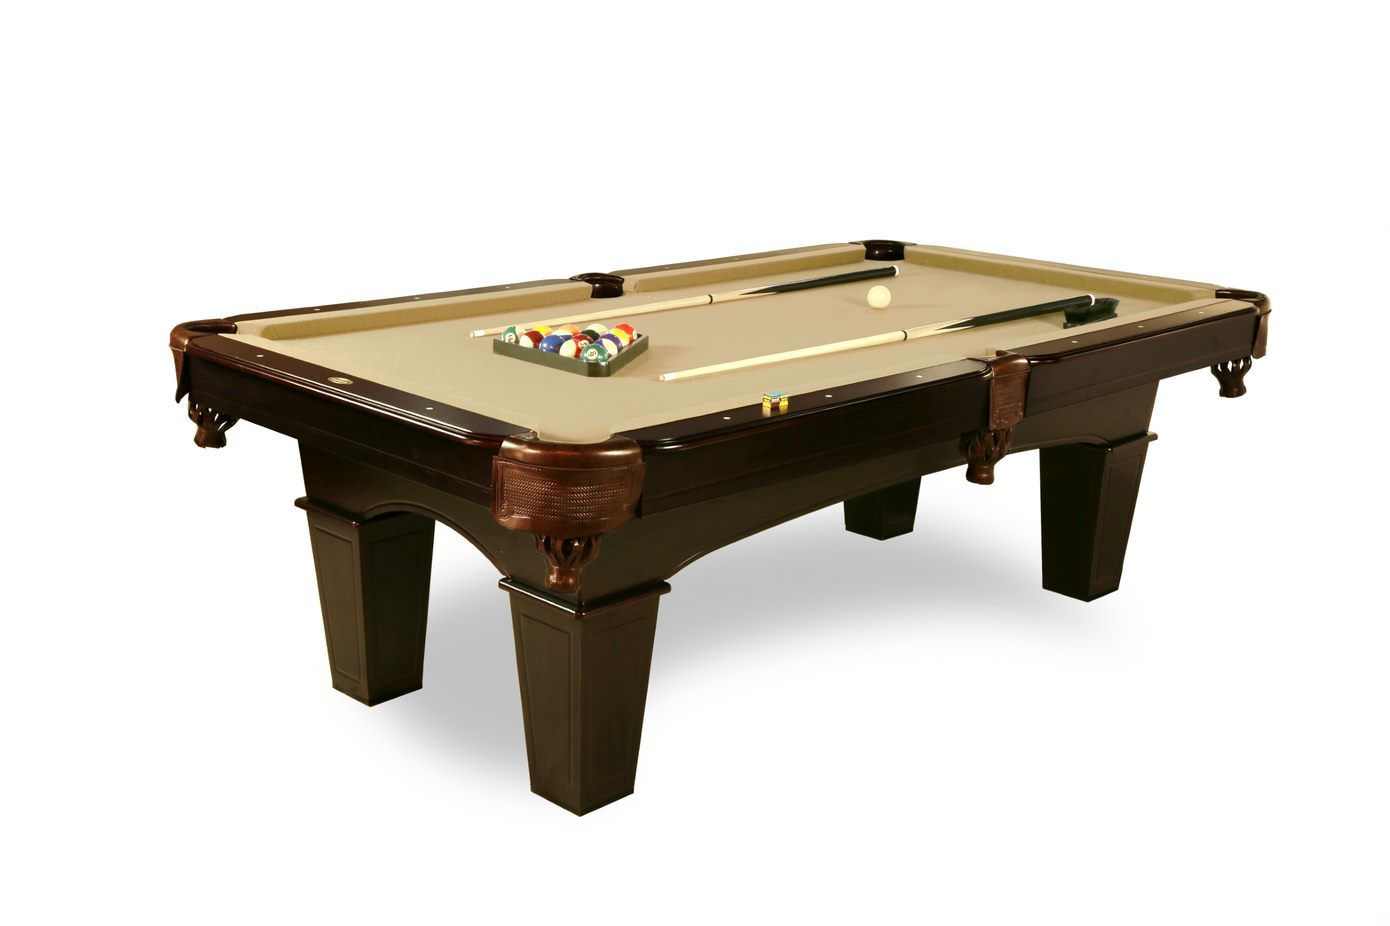 Sportcraft Wrightwood 96″ Billiard Table with Table Tennis Top